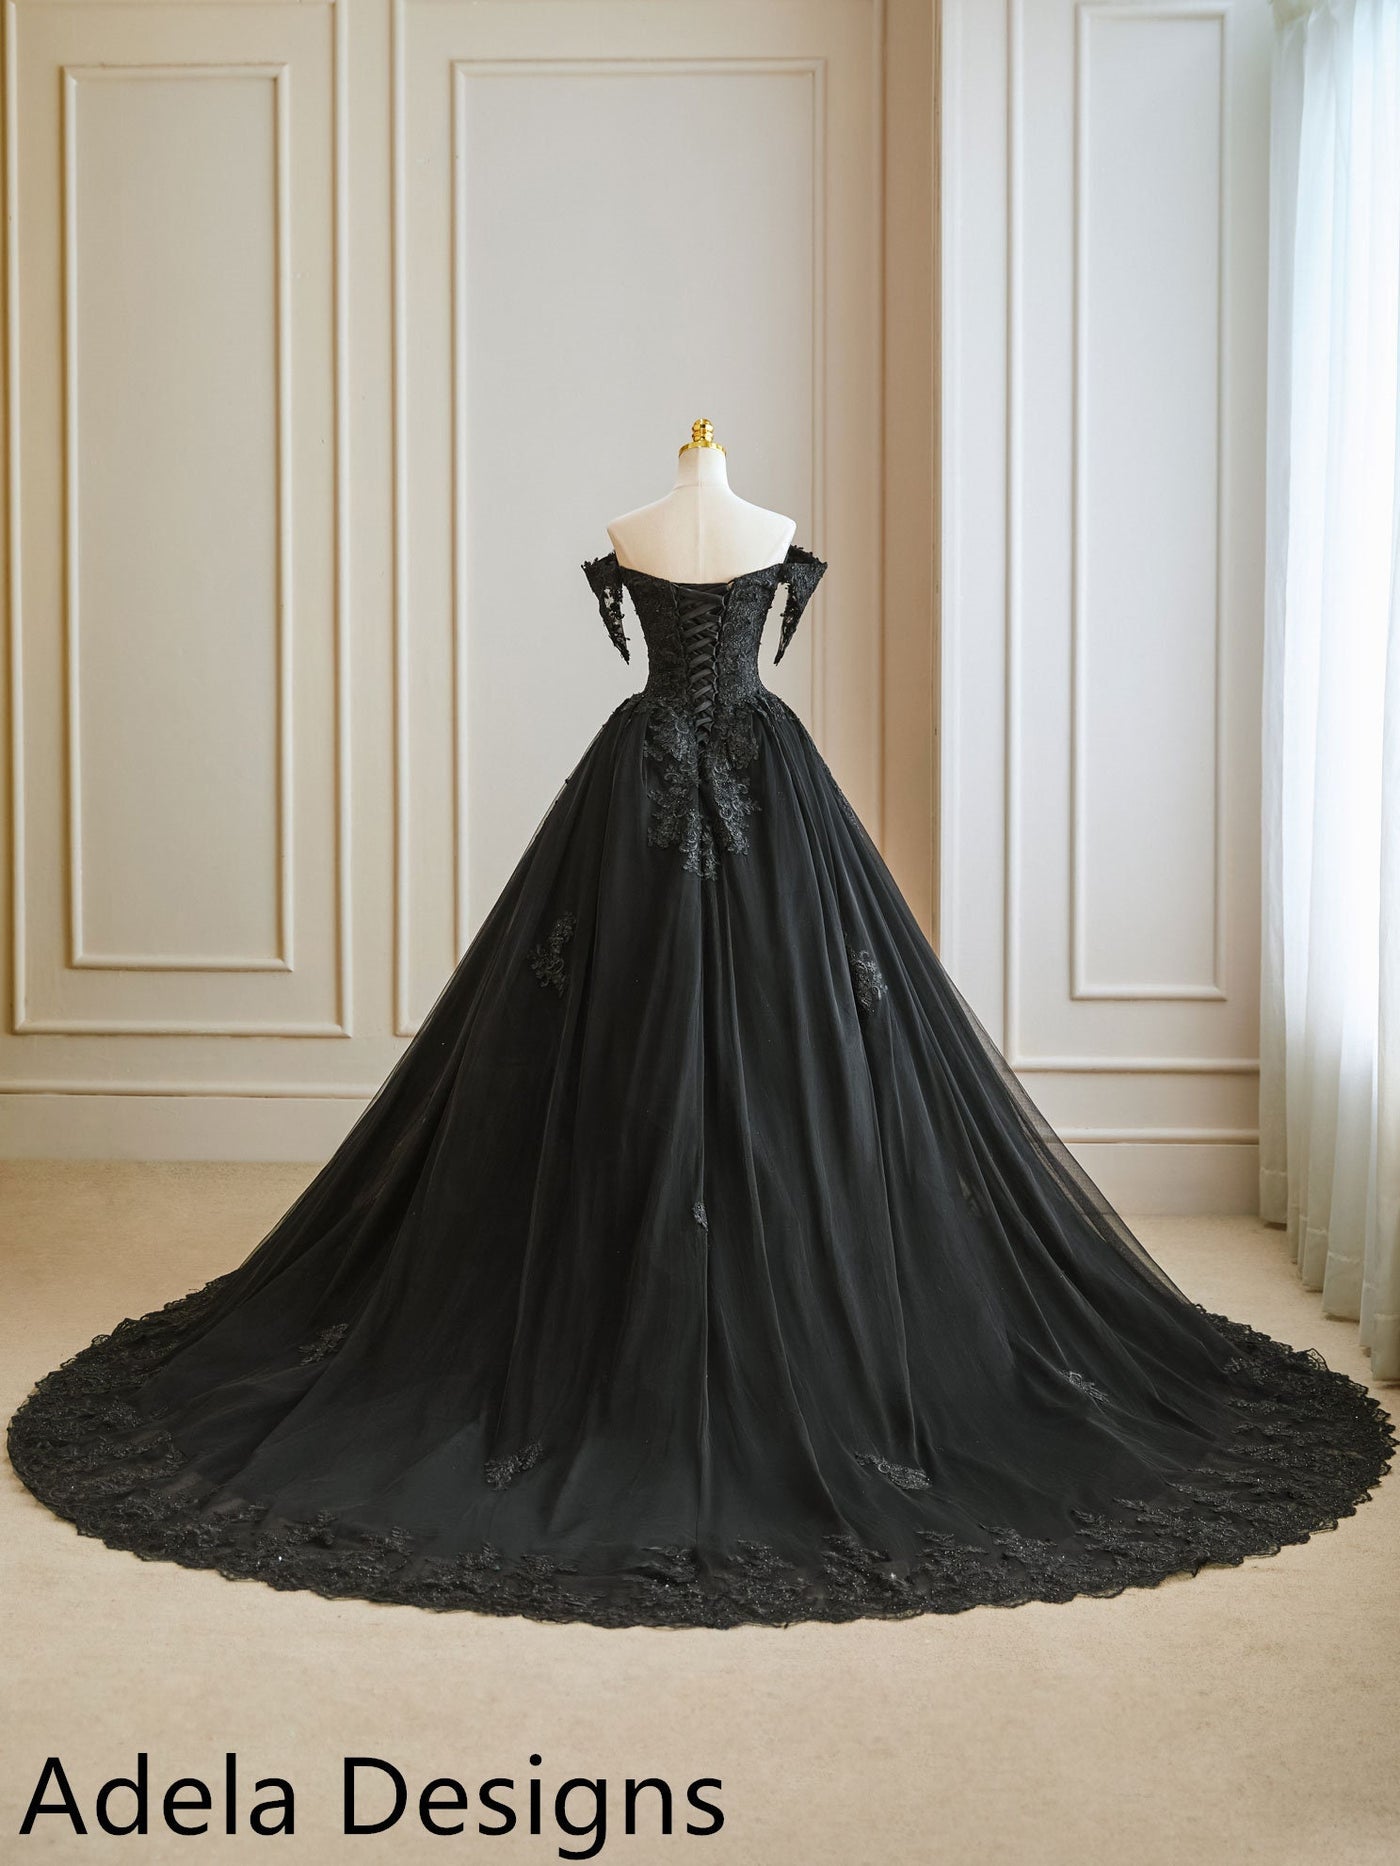 Strapless All Lace Black Formal Dress Long With Train For Woman #CH6681 -  GemGrace.com